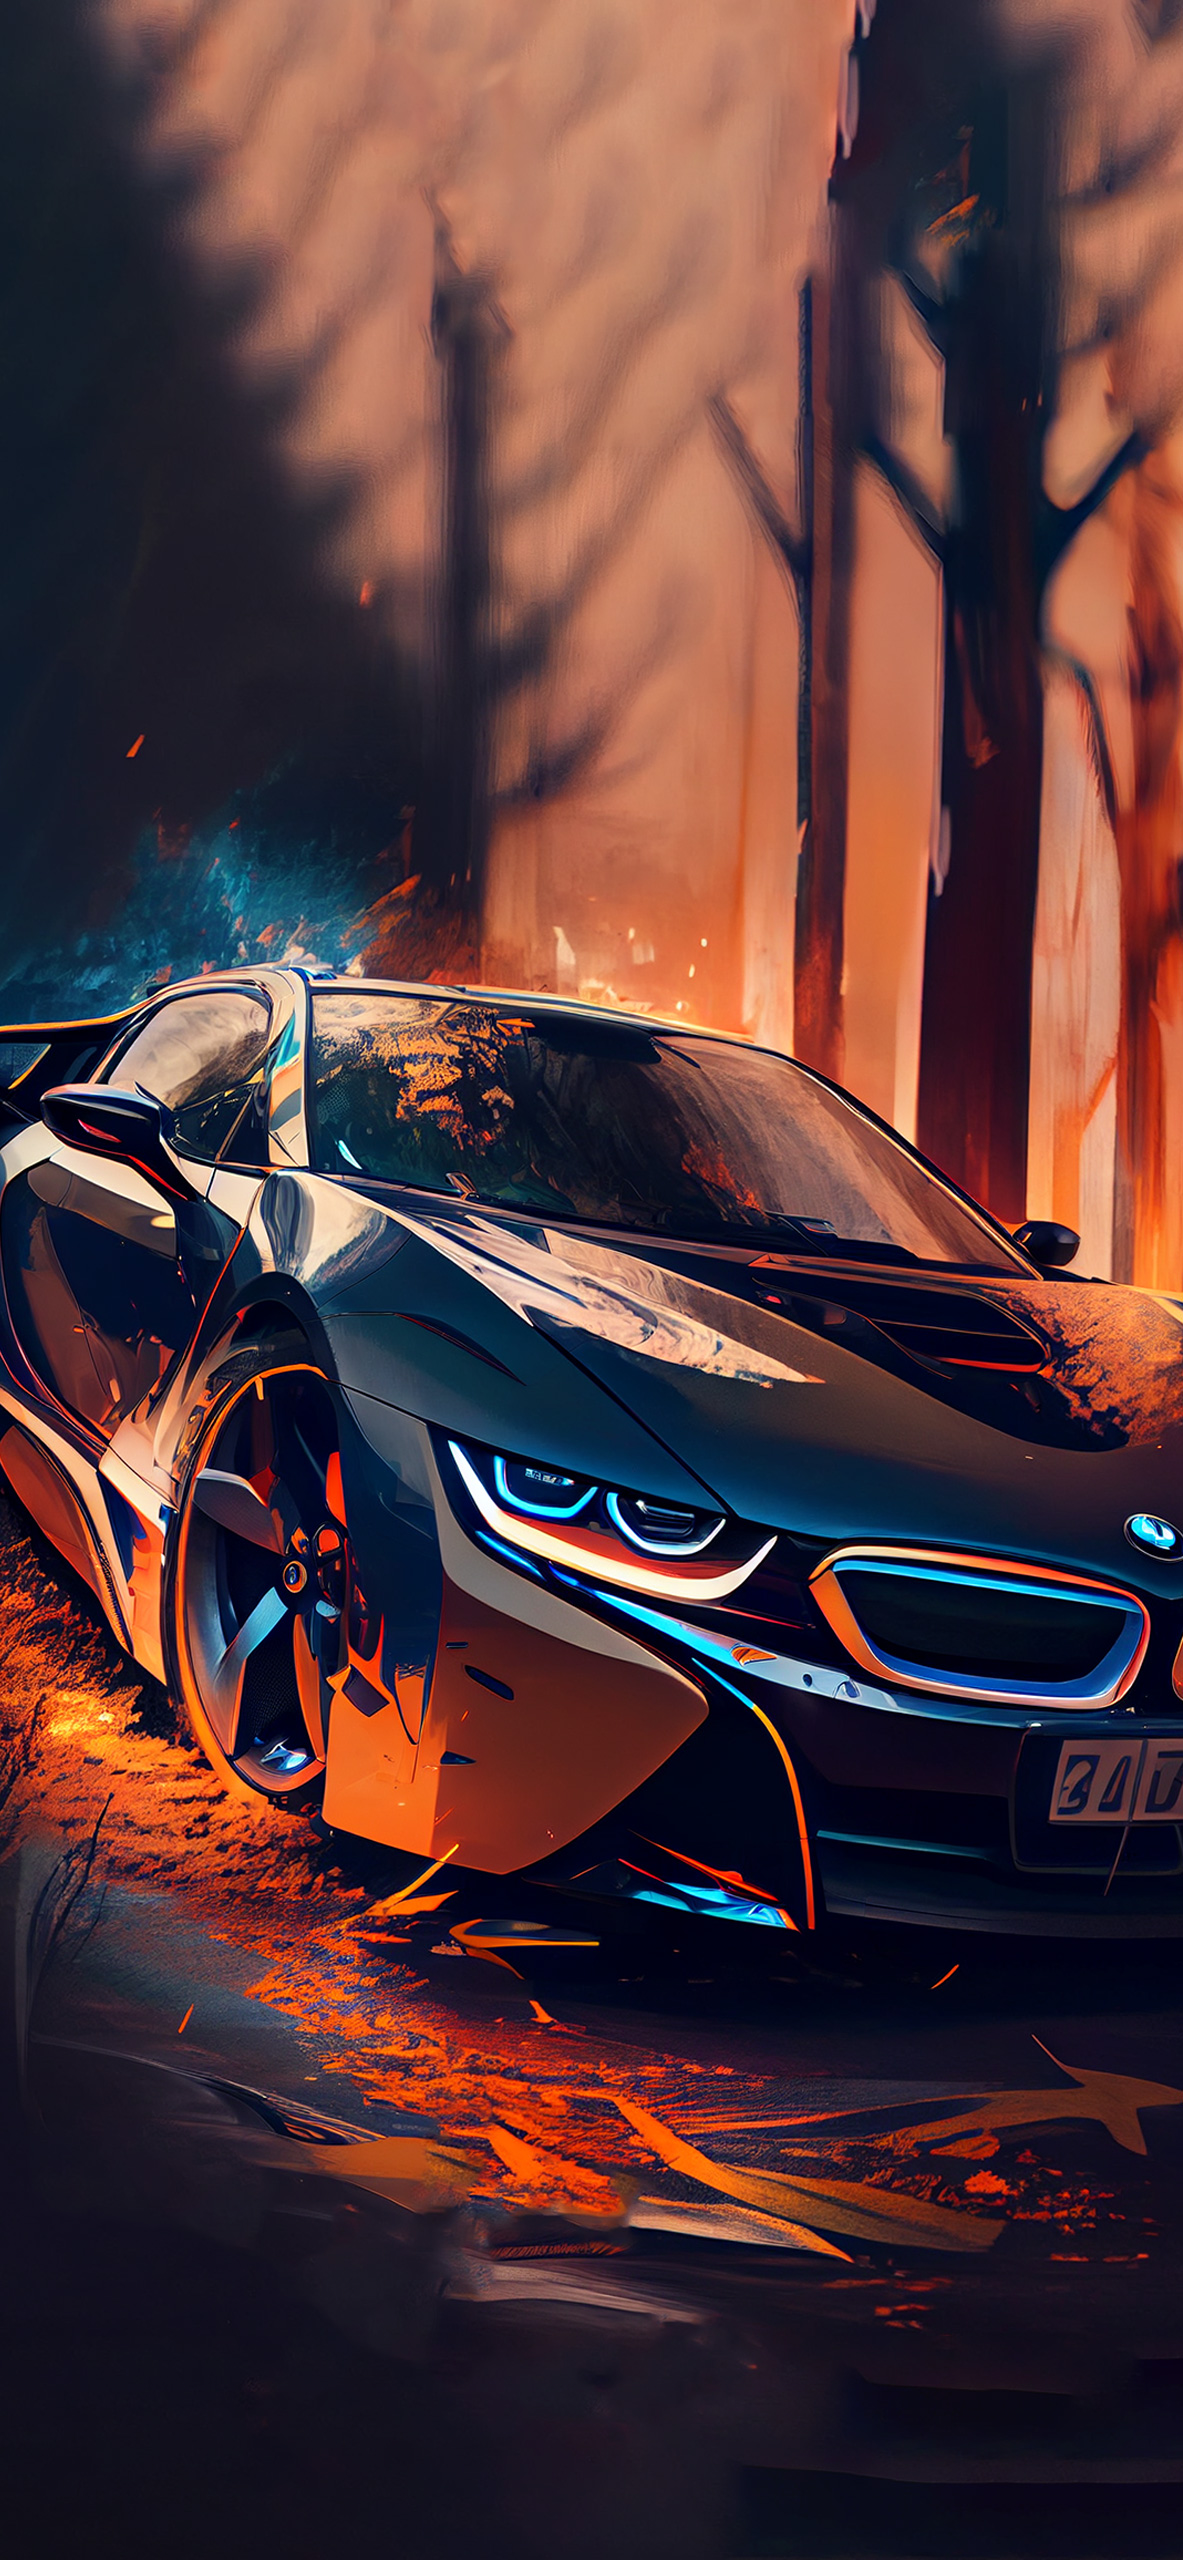 BMW i8 Wallpapers - BMW Aesthetic Wallpapers iPhone & Android